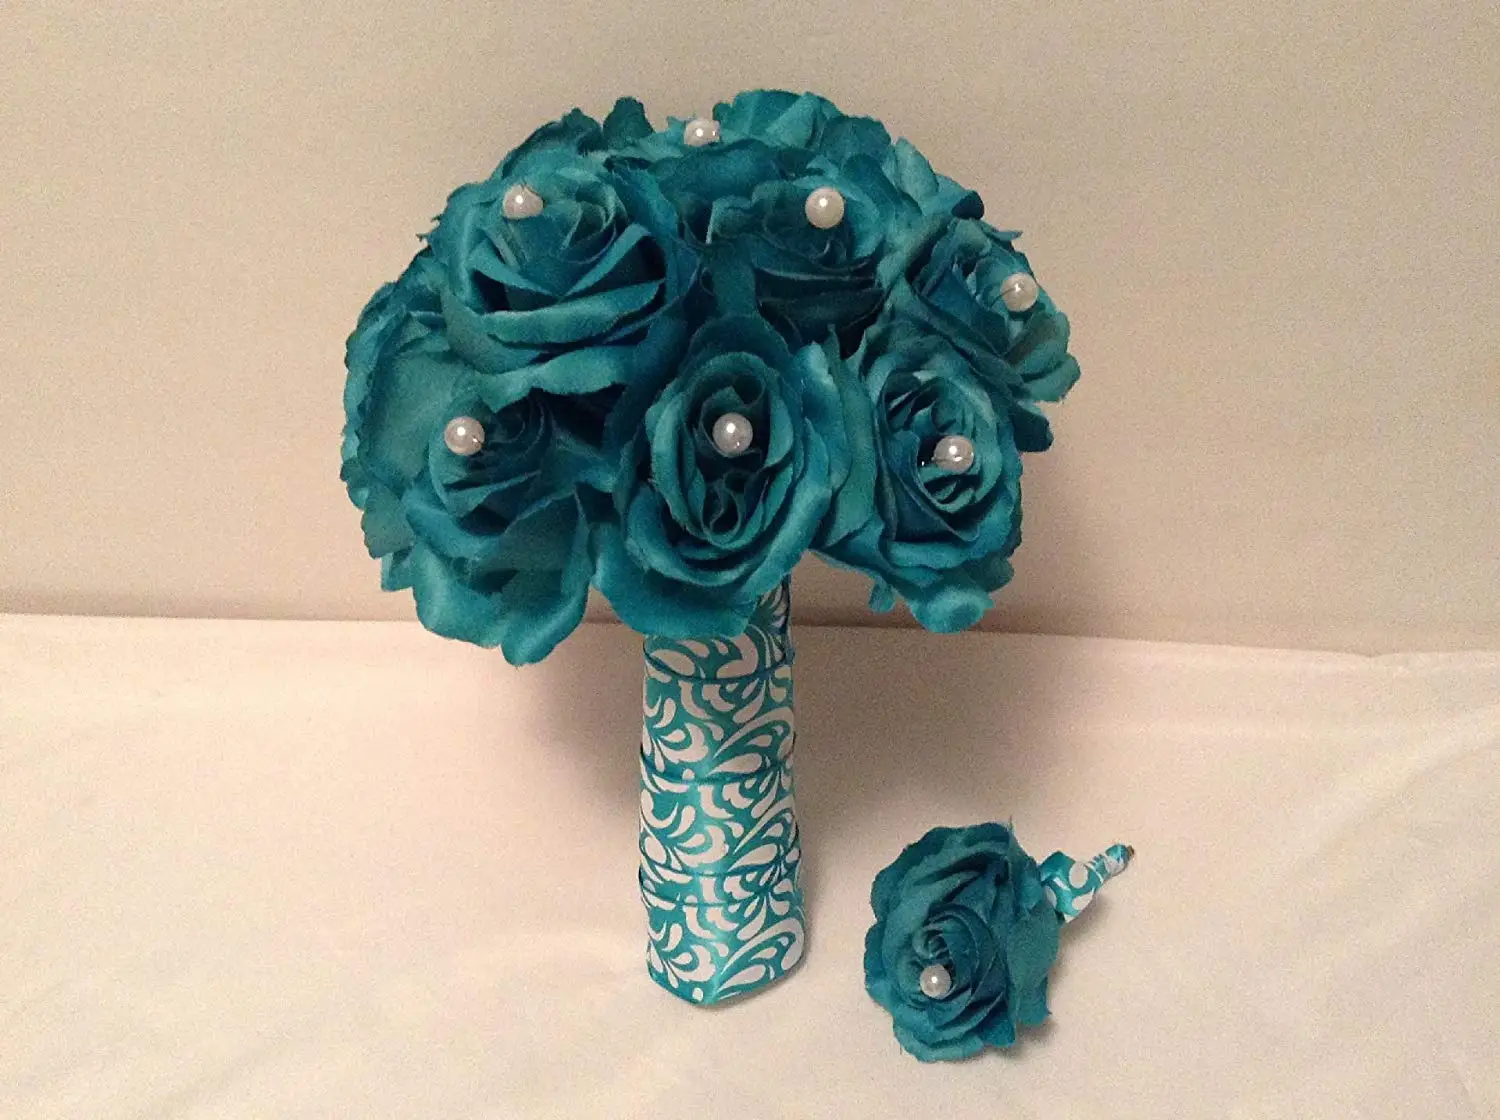 Cheap Wedding Bouquet Teal Find Wedding Bouquet Teal Deals On Line At Alibaba Com